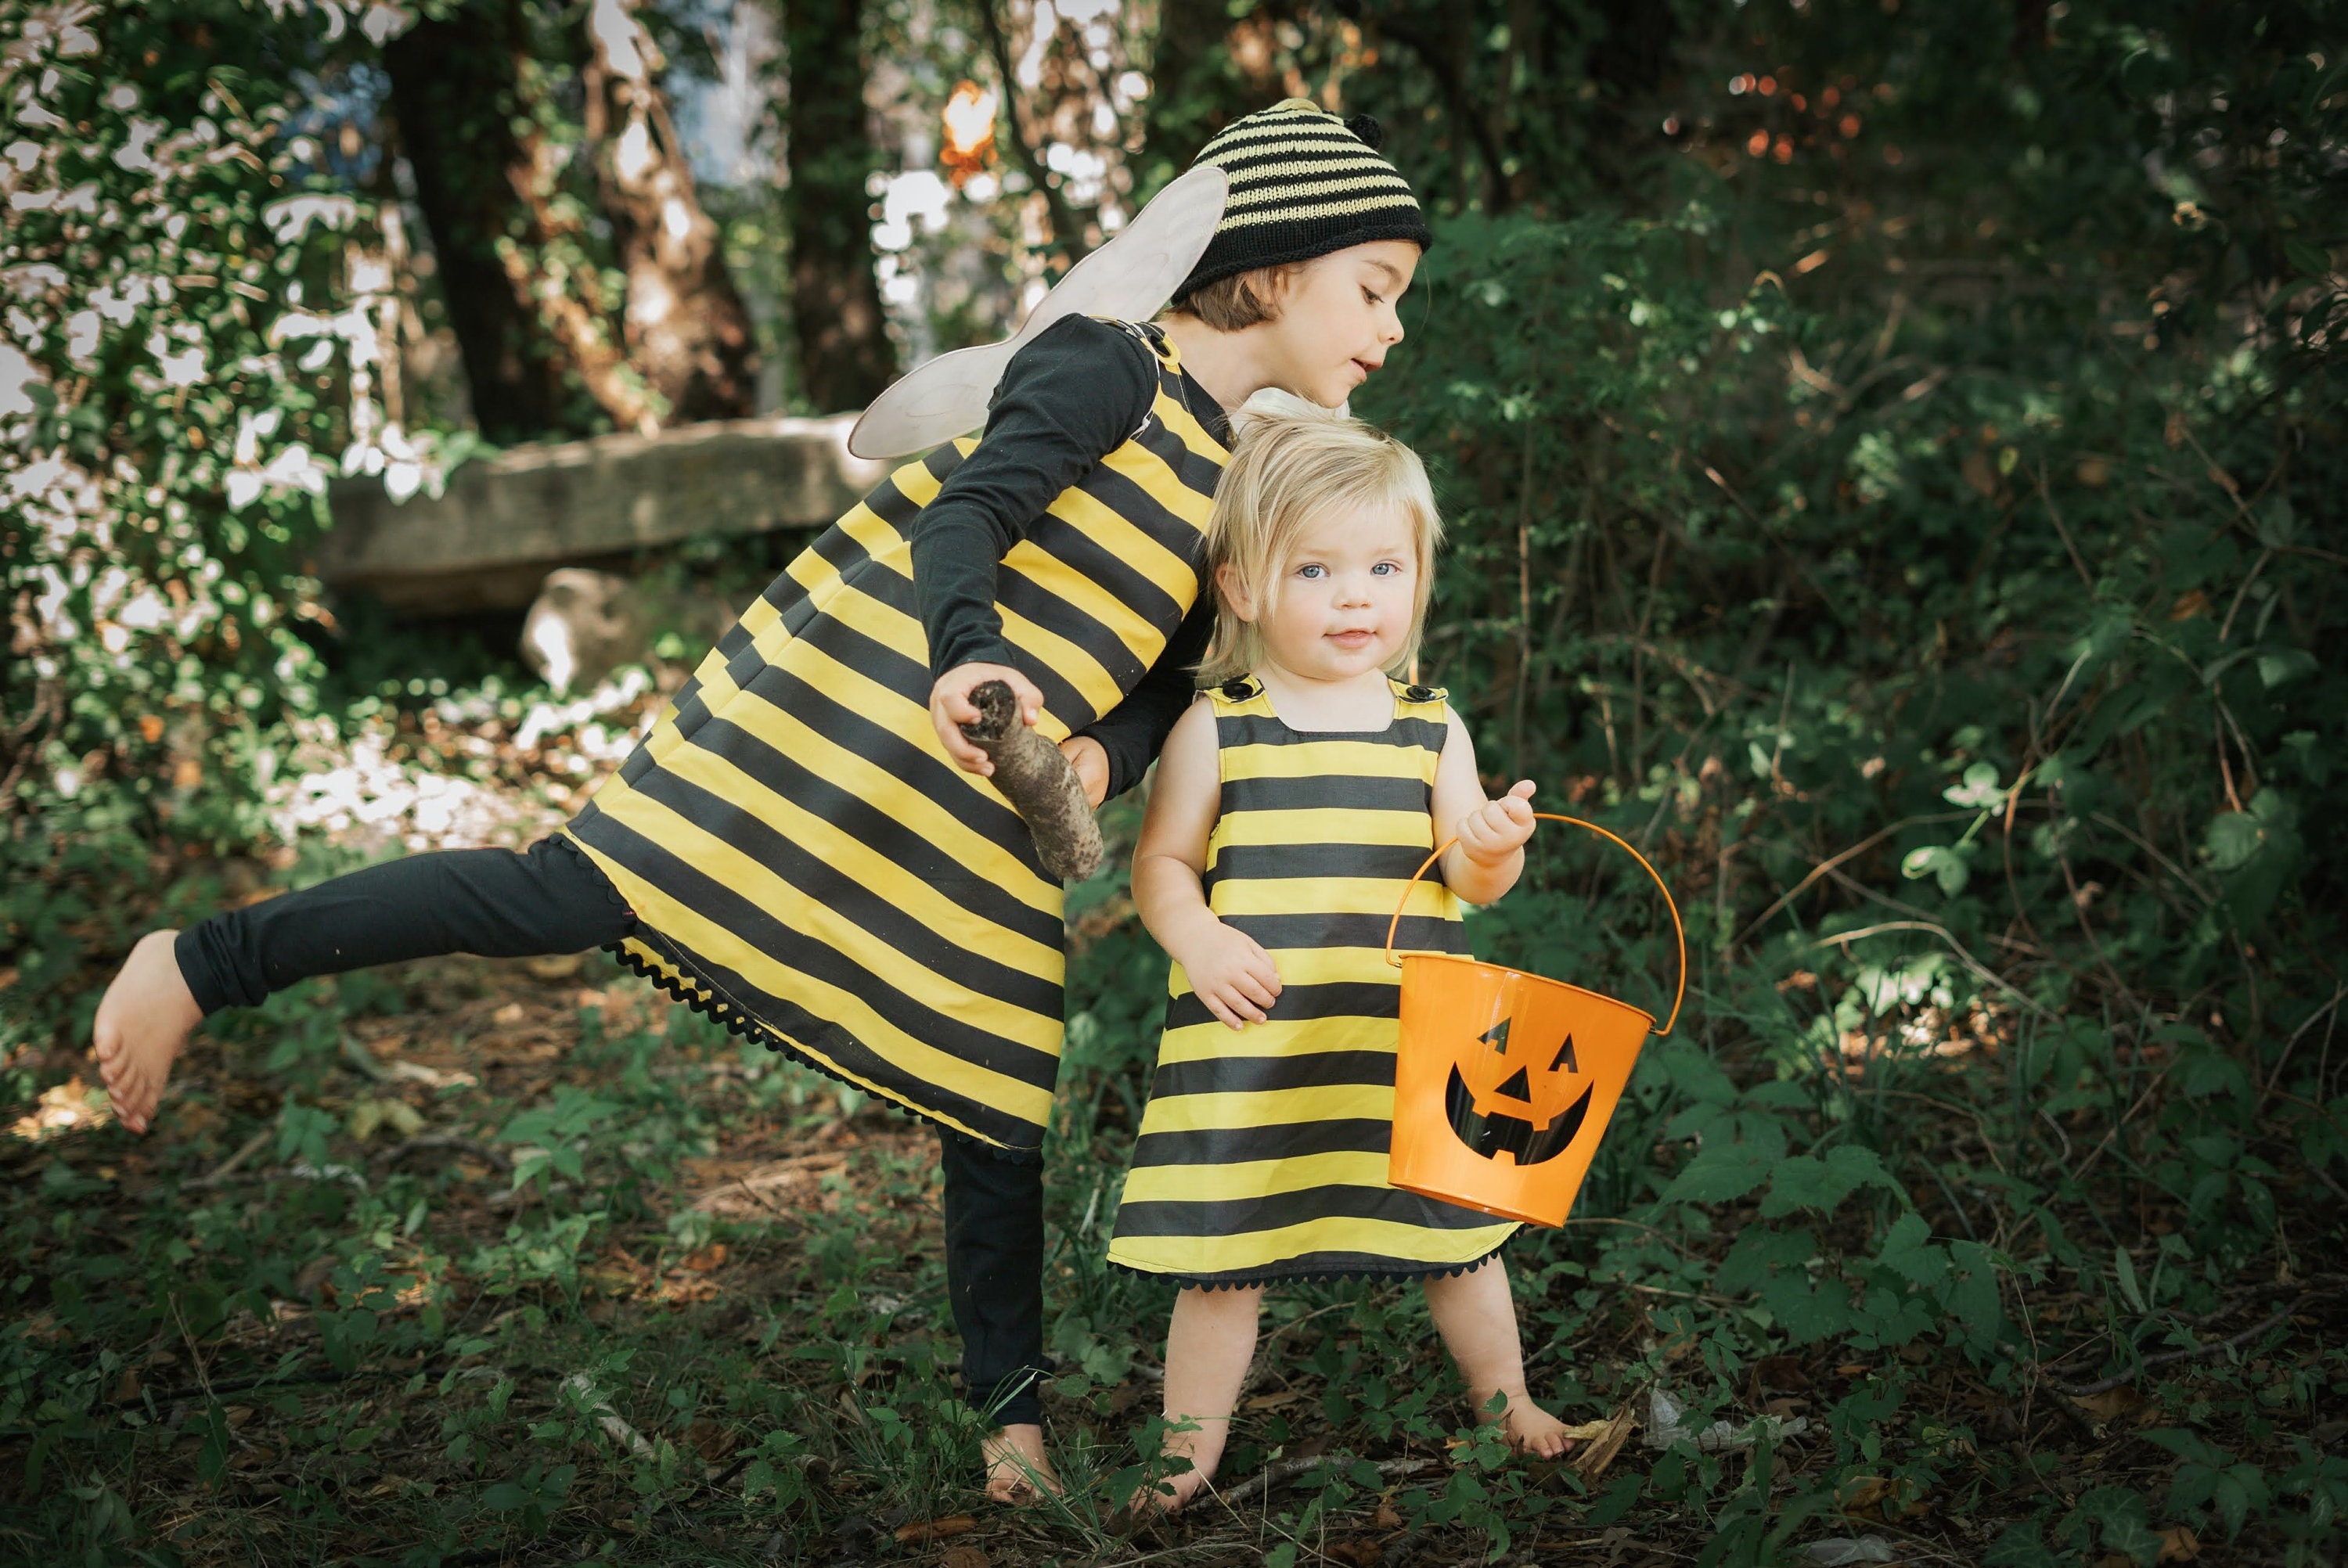 Bumblebee Costume Set for Girls Bumble bee Dressy - Dress Up